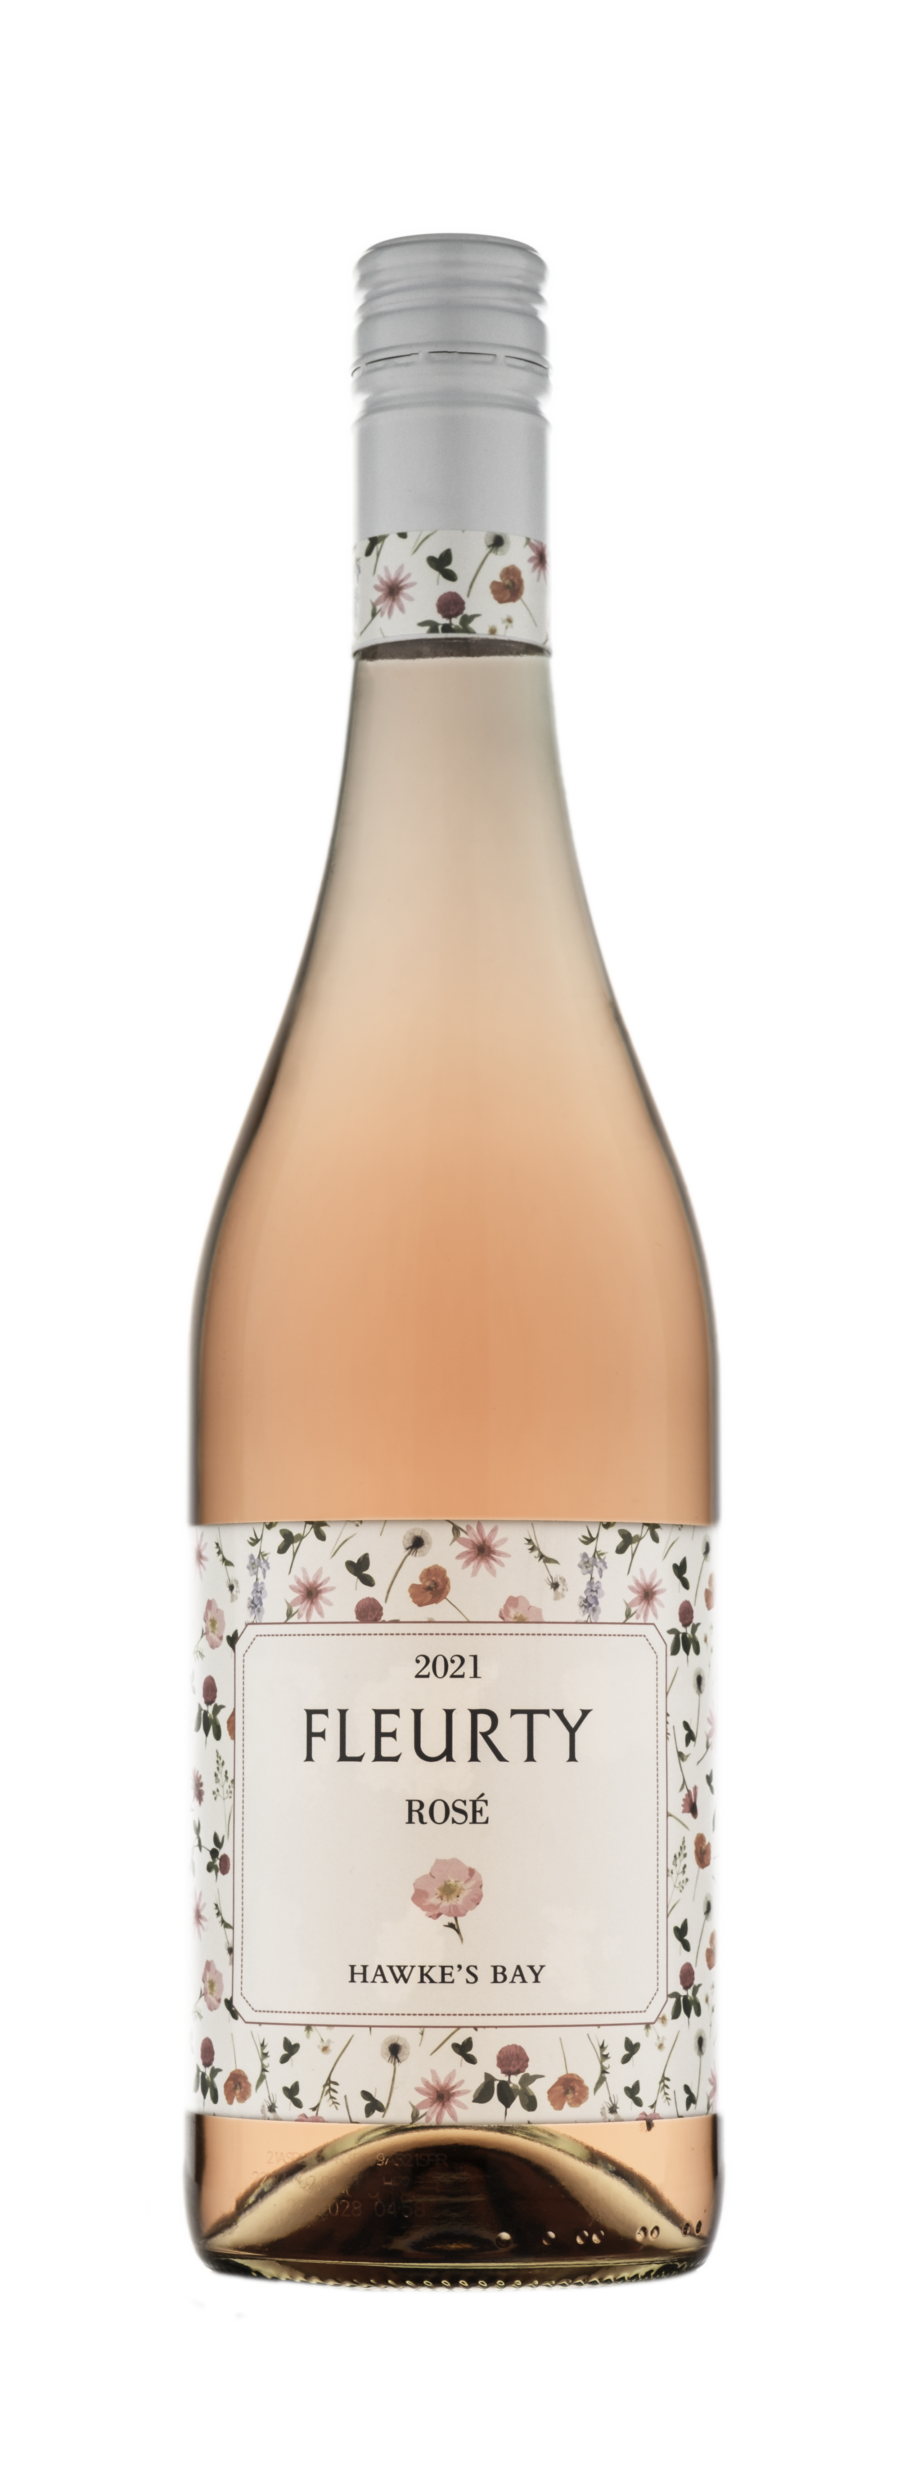 Buy Single Vineyard Wine Aromatic Fleurty lightly carbonated rose from hawkes bay new zealand